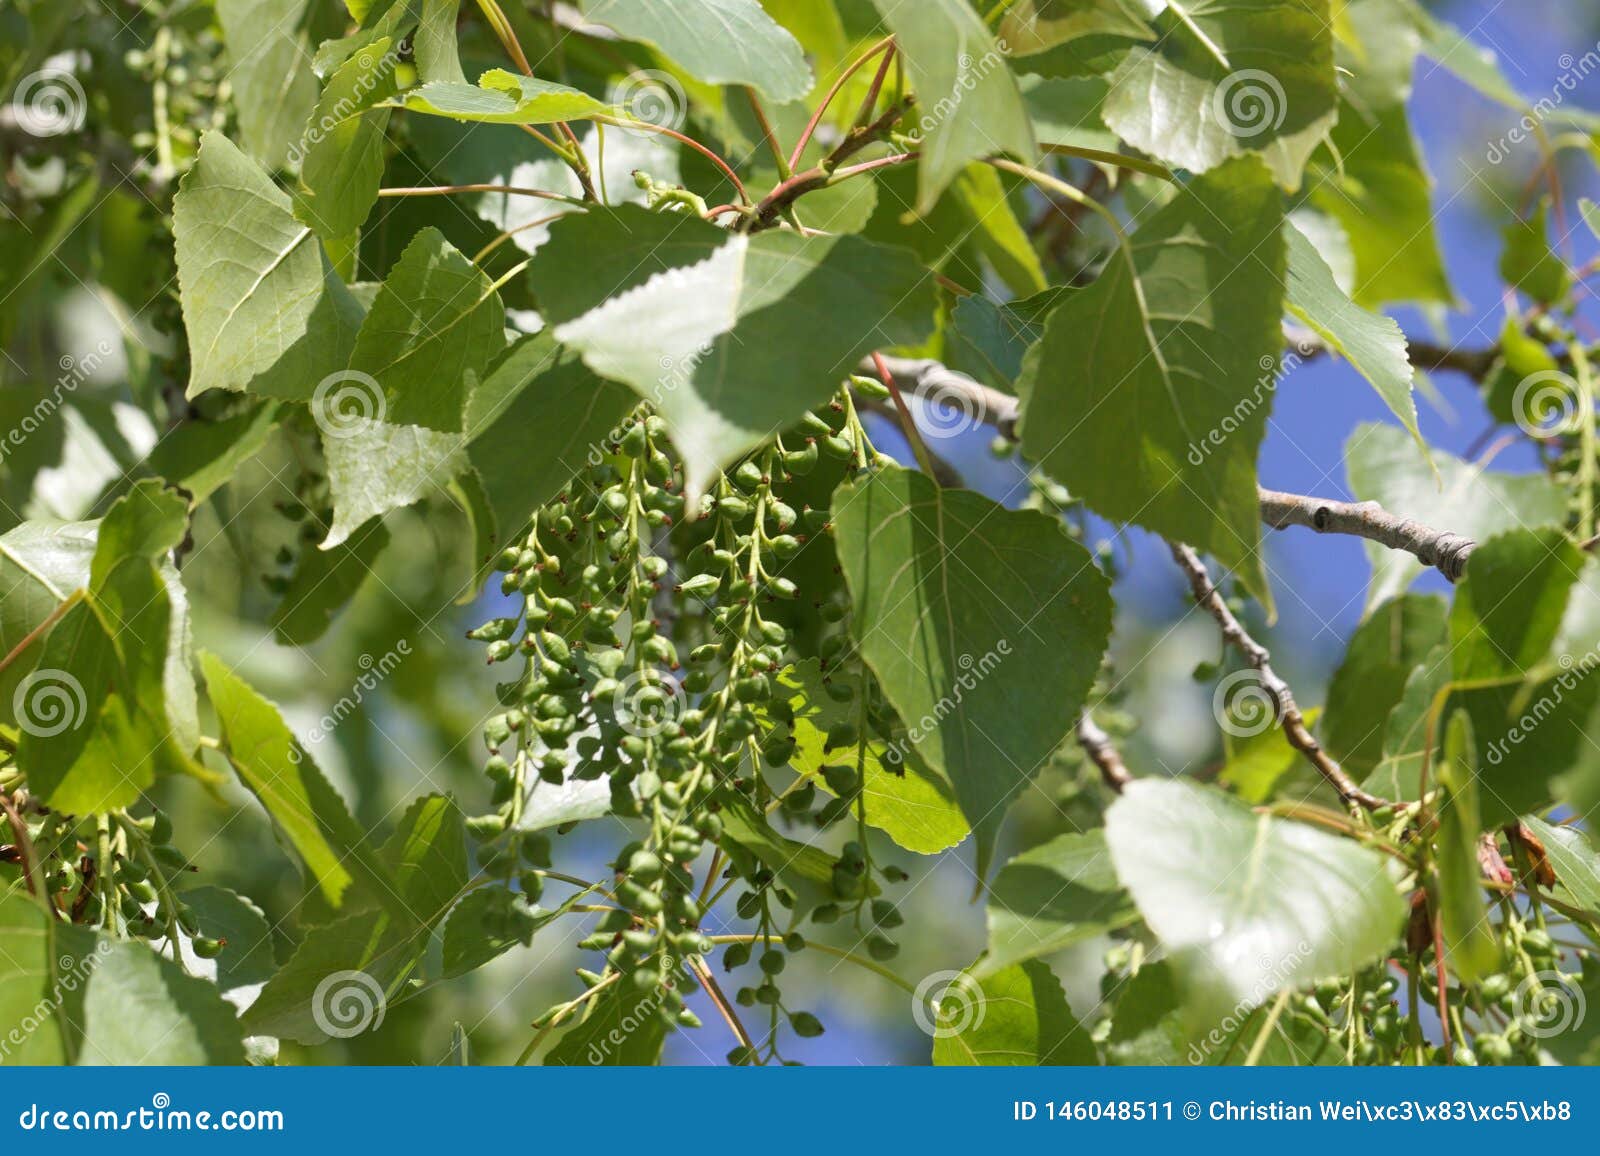 leaves and fruits of a canadian poplar populus x canadensis